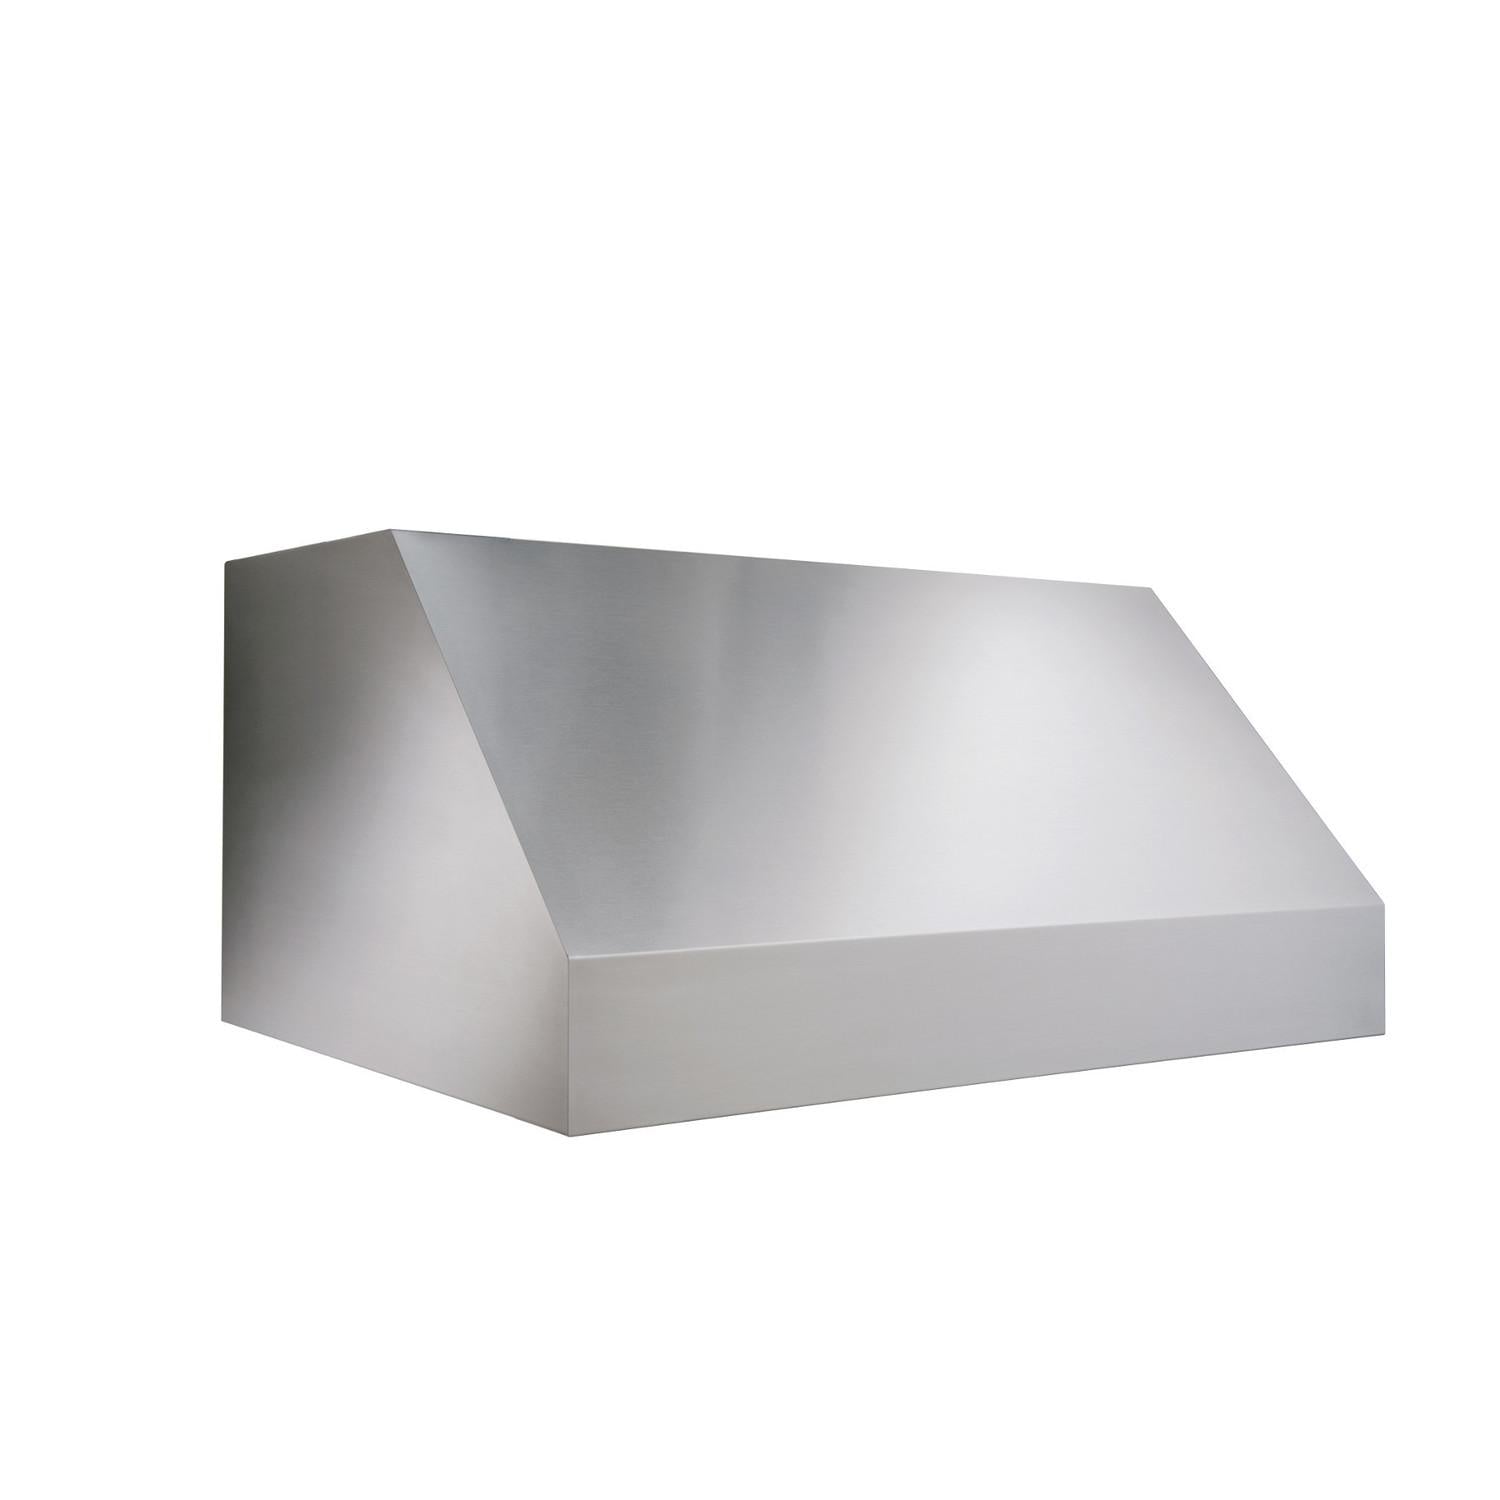 Broan® EPD61 Series 36-inch Pro-Style Outdoor Range Hood, 1290 Max Blower CFM, Stainless Steel